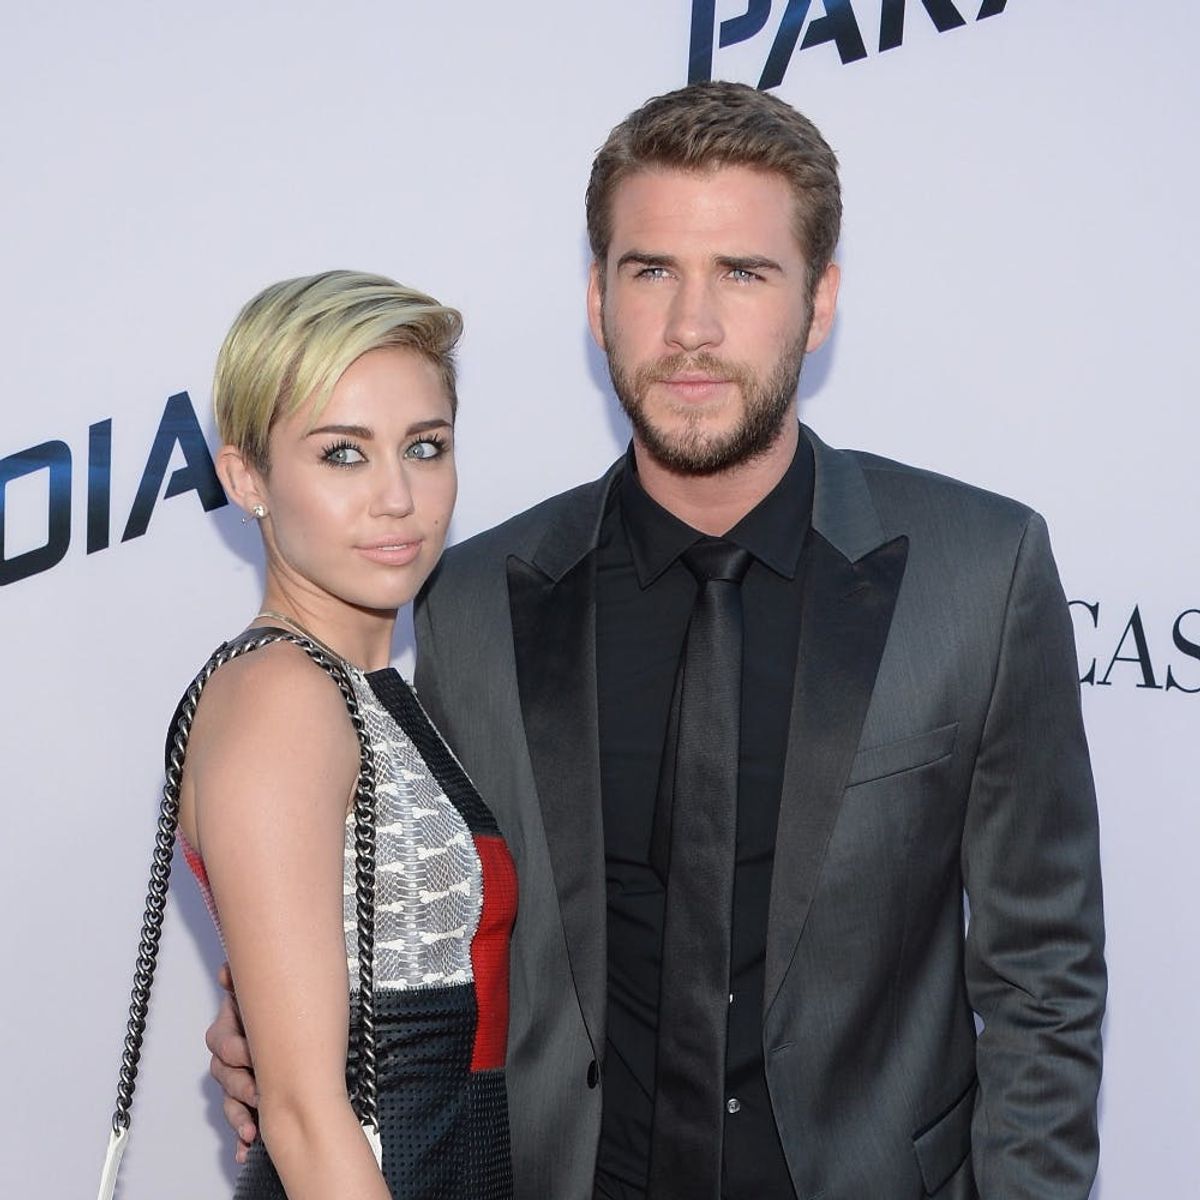 Miley Cyrus Might Be Planning a Summer Wedding (Even Though Liam Says They’re Not Engaged)